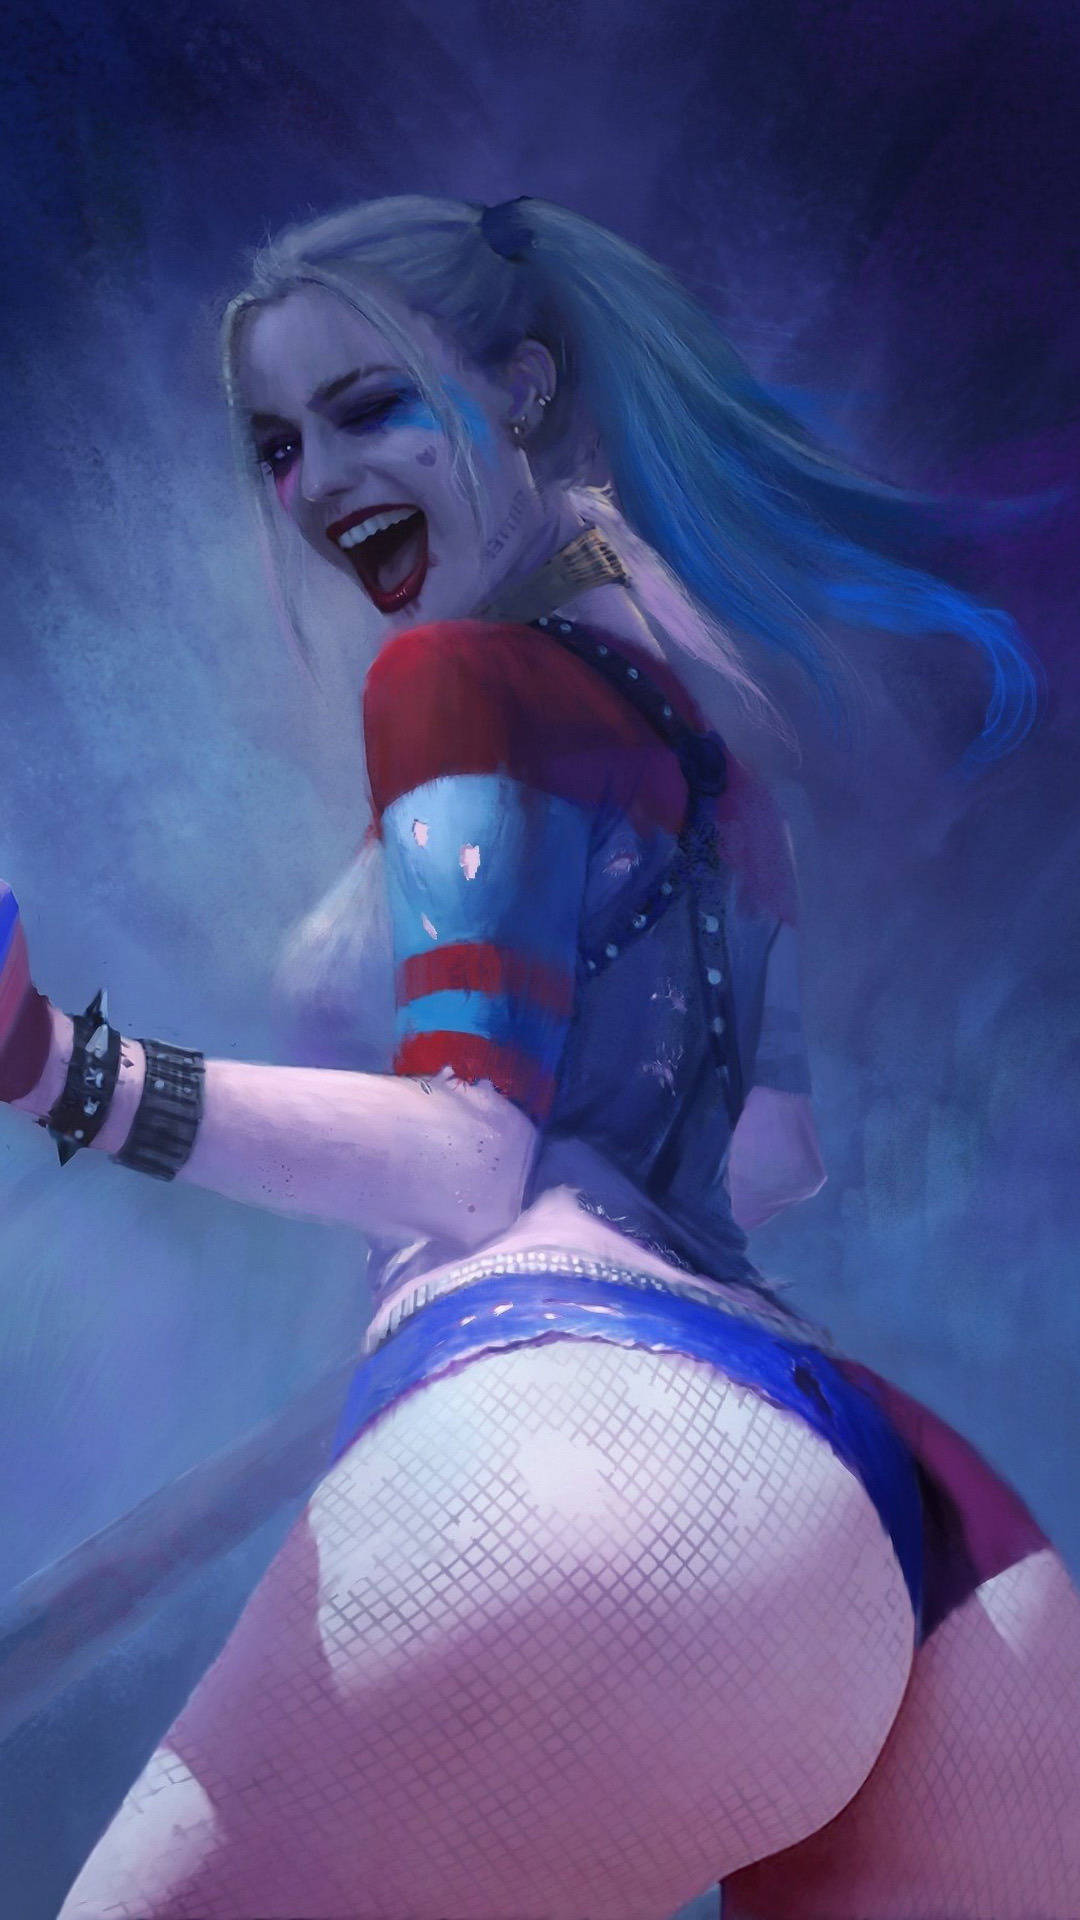 Harley Quinn Showing Her Badass Moves! Background